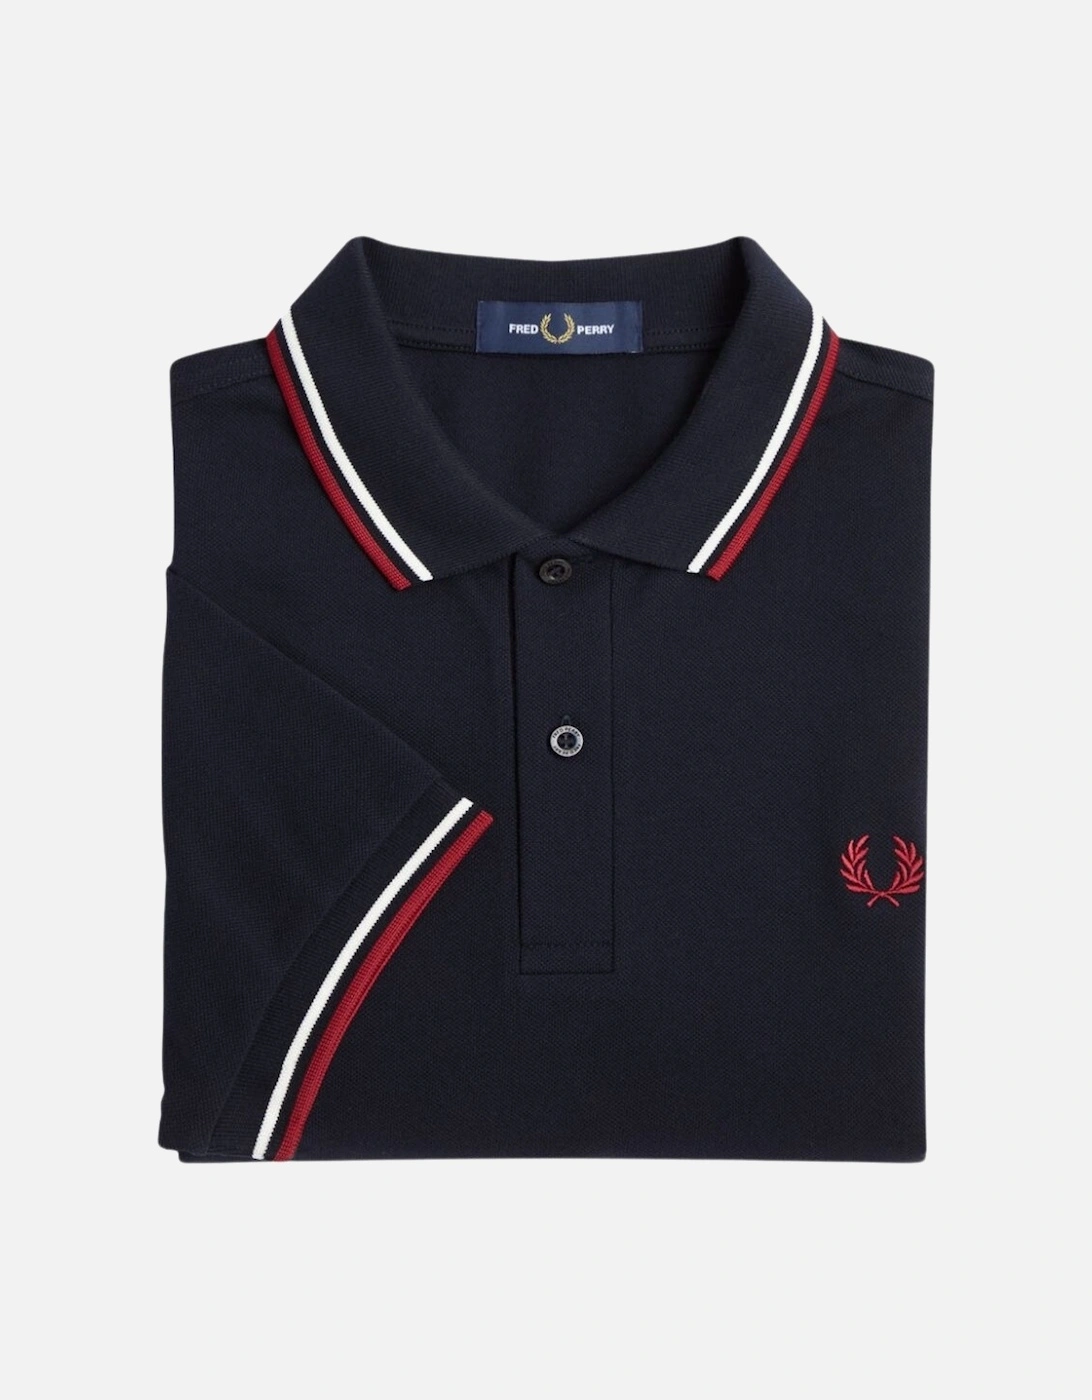 M3600 Twin Tipped FP Polo - Navy/White/Red